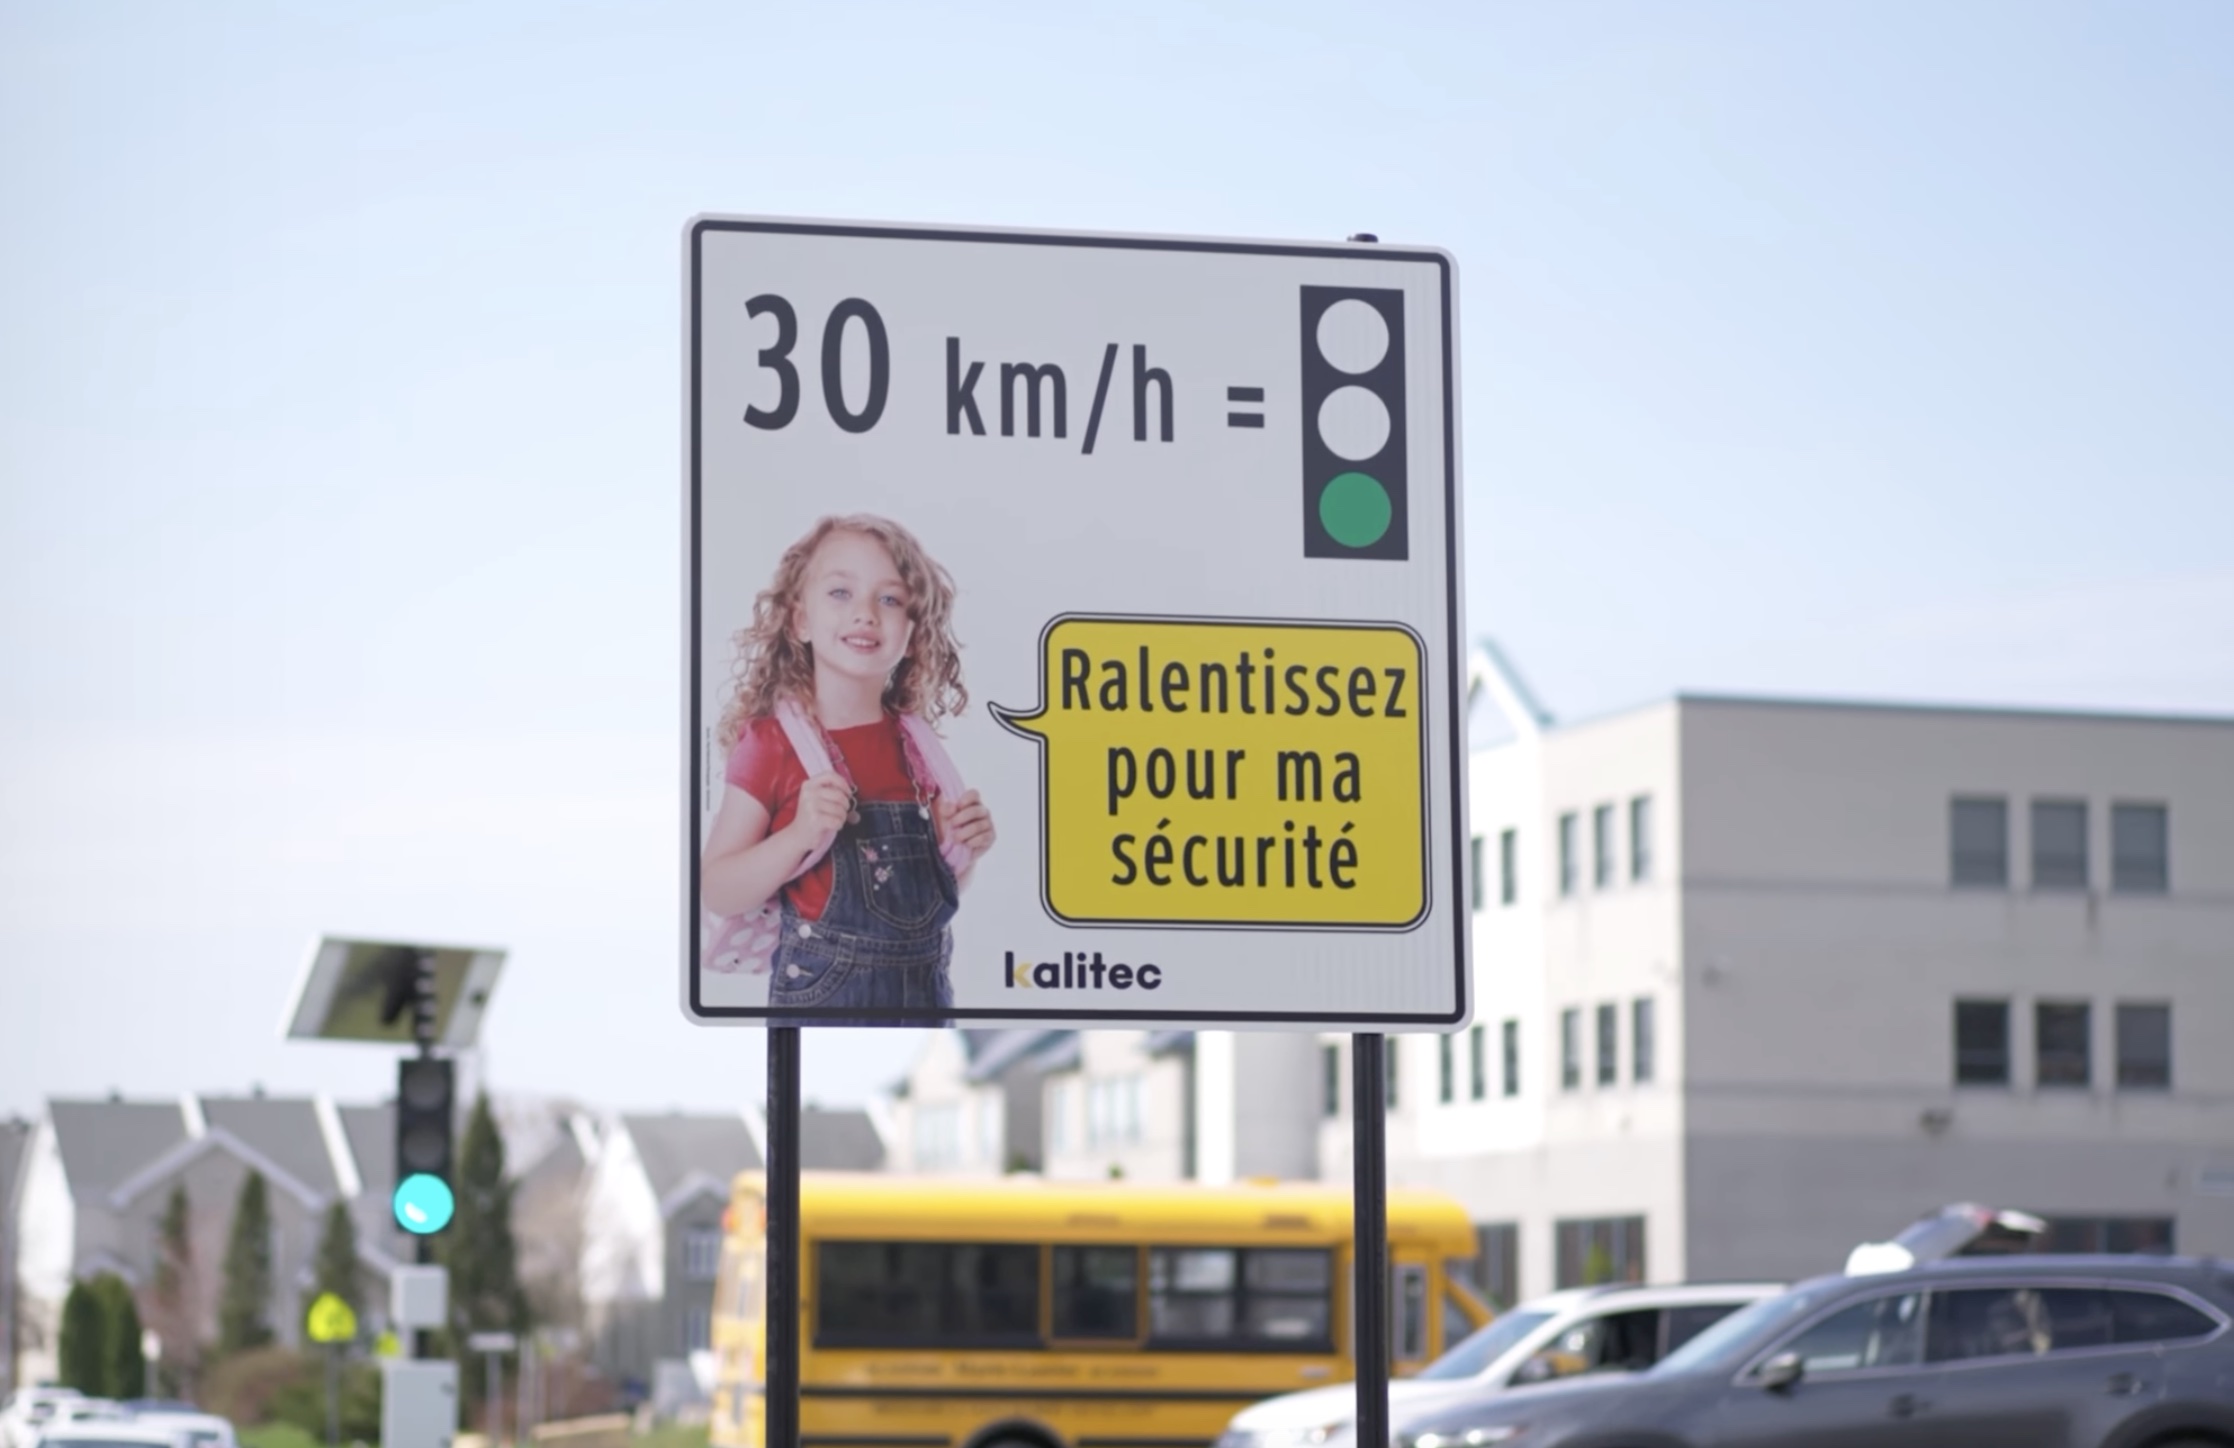 A street sign in French reads "30 km/h" next to a green traffic light; below that, a larger photo of a young girl wearing a backpack is next to a yellow speech bubble that says "ralentissez pour ma securite," or "slow down for my safety." A school bus and a green traffic light are visible behind the sign in the background.